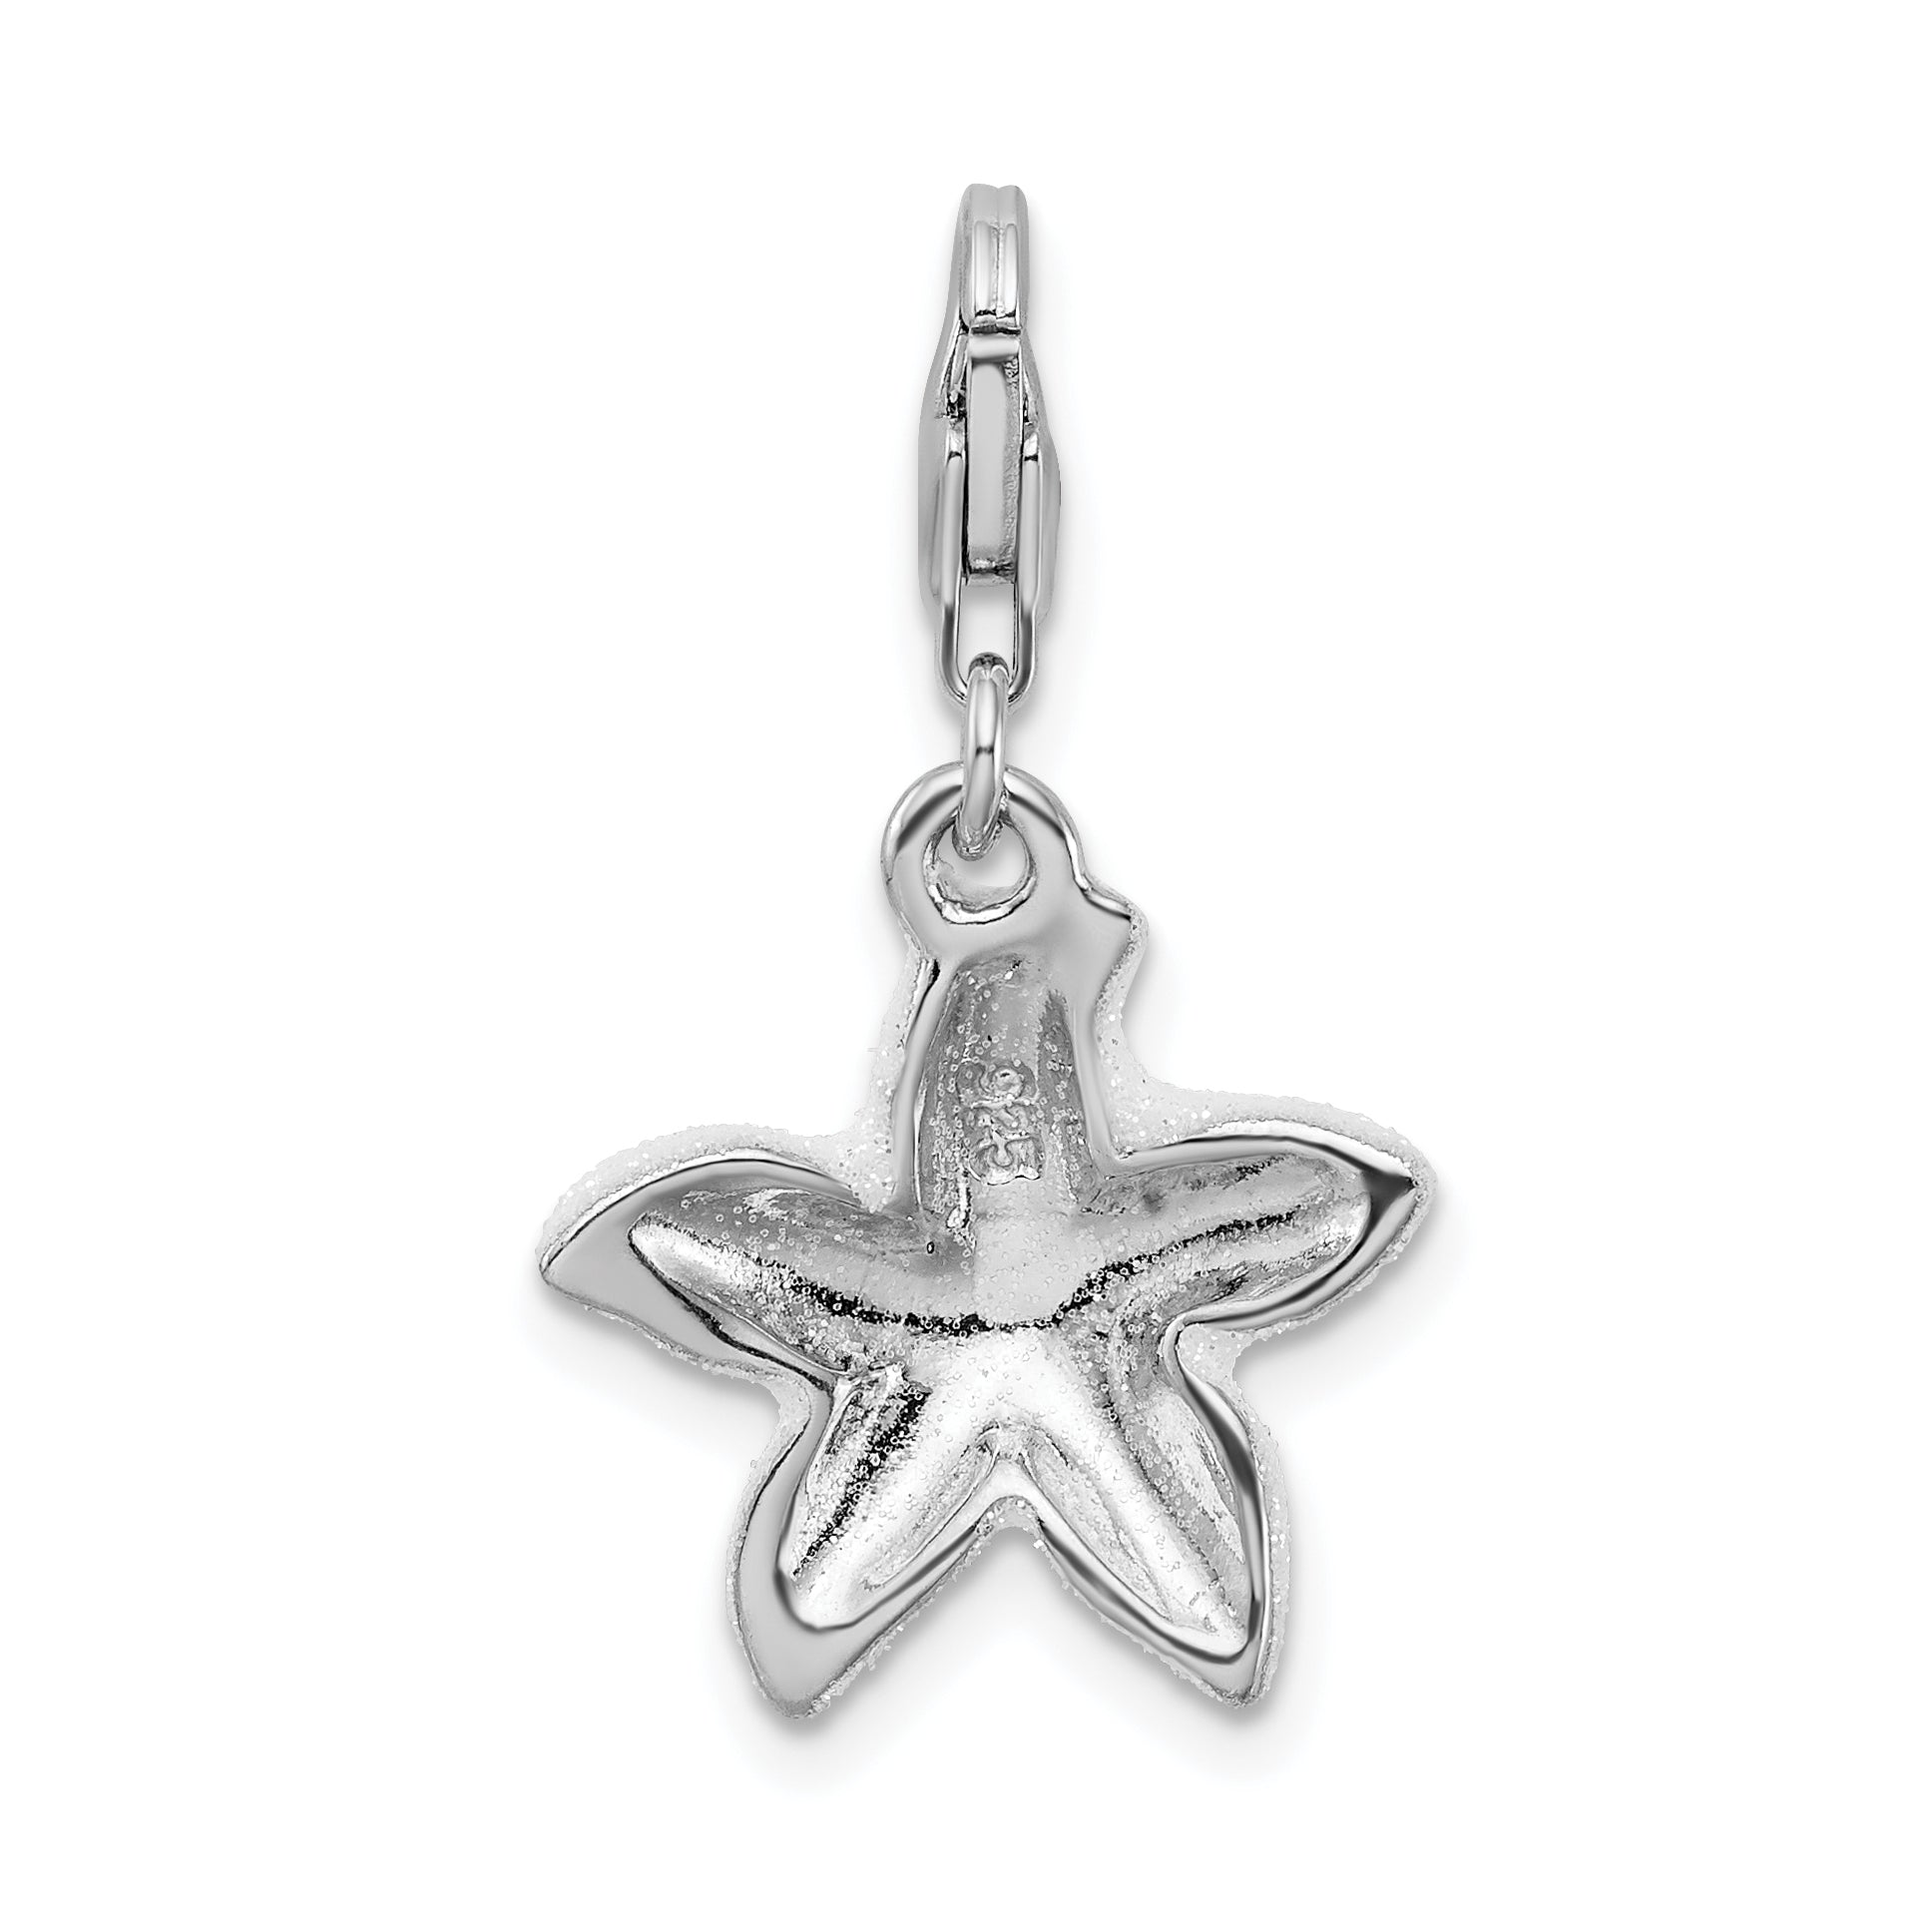 Amore La Vita Sterling Silver Rhodium-plated Enameled Pink Sparkle Starfish Charm with Fancy Lobster Clasp